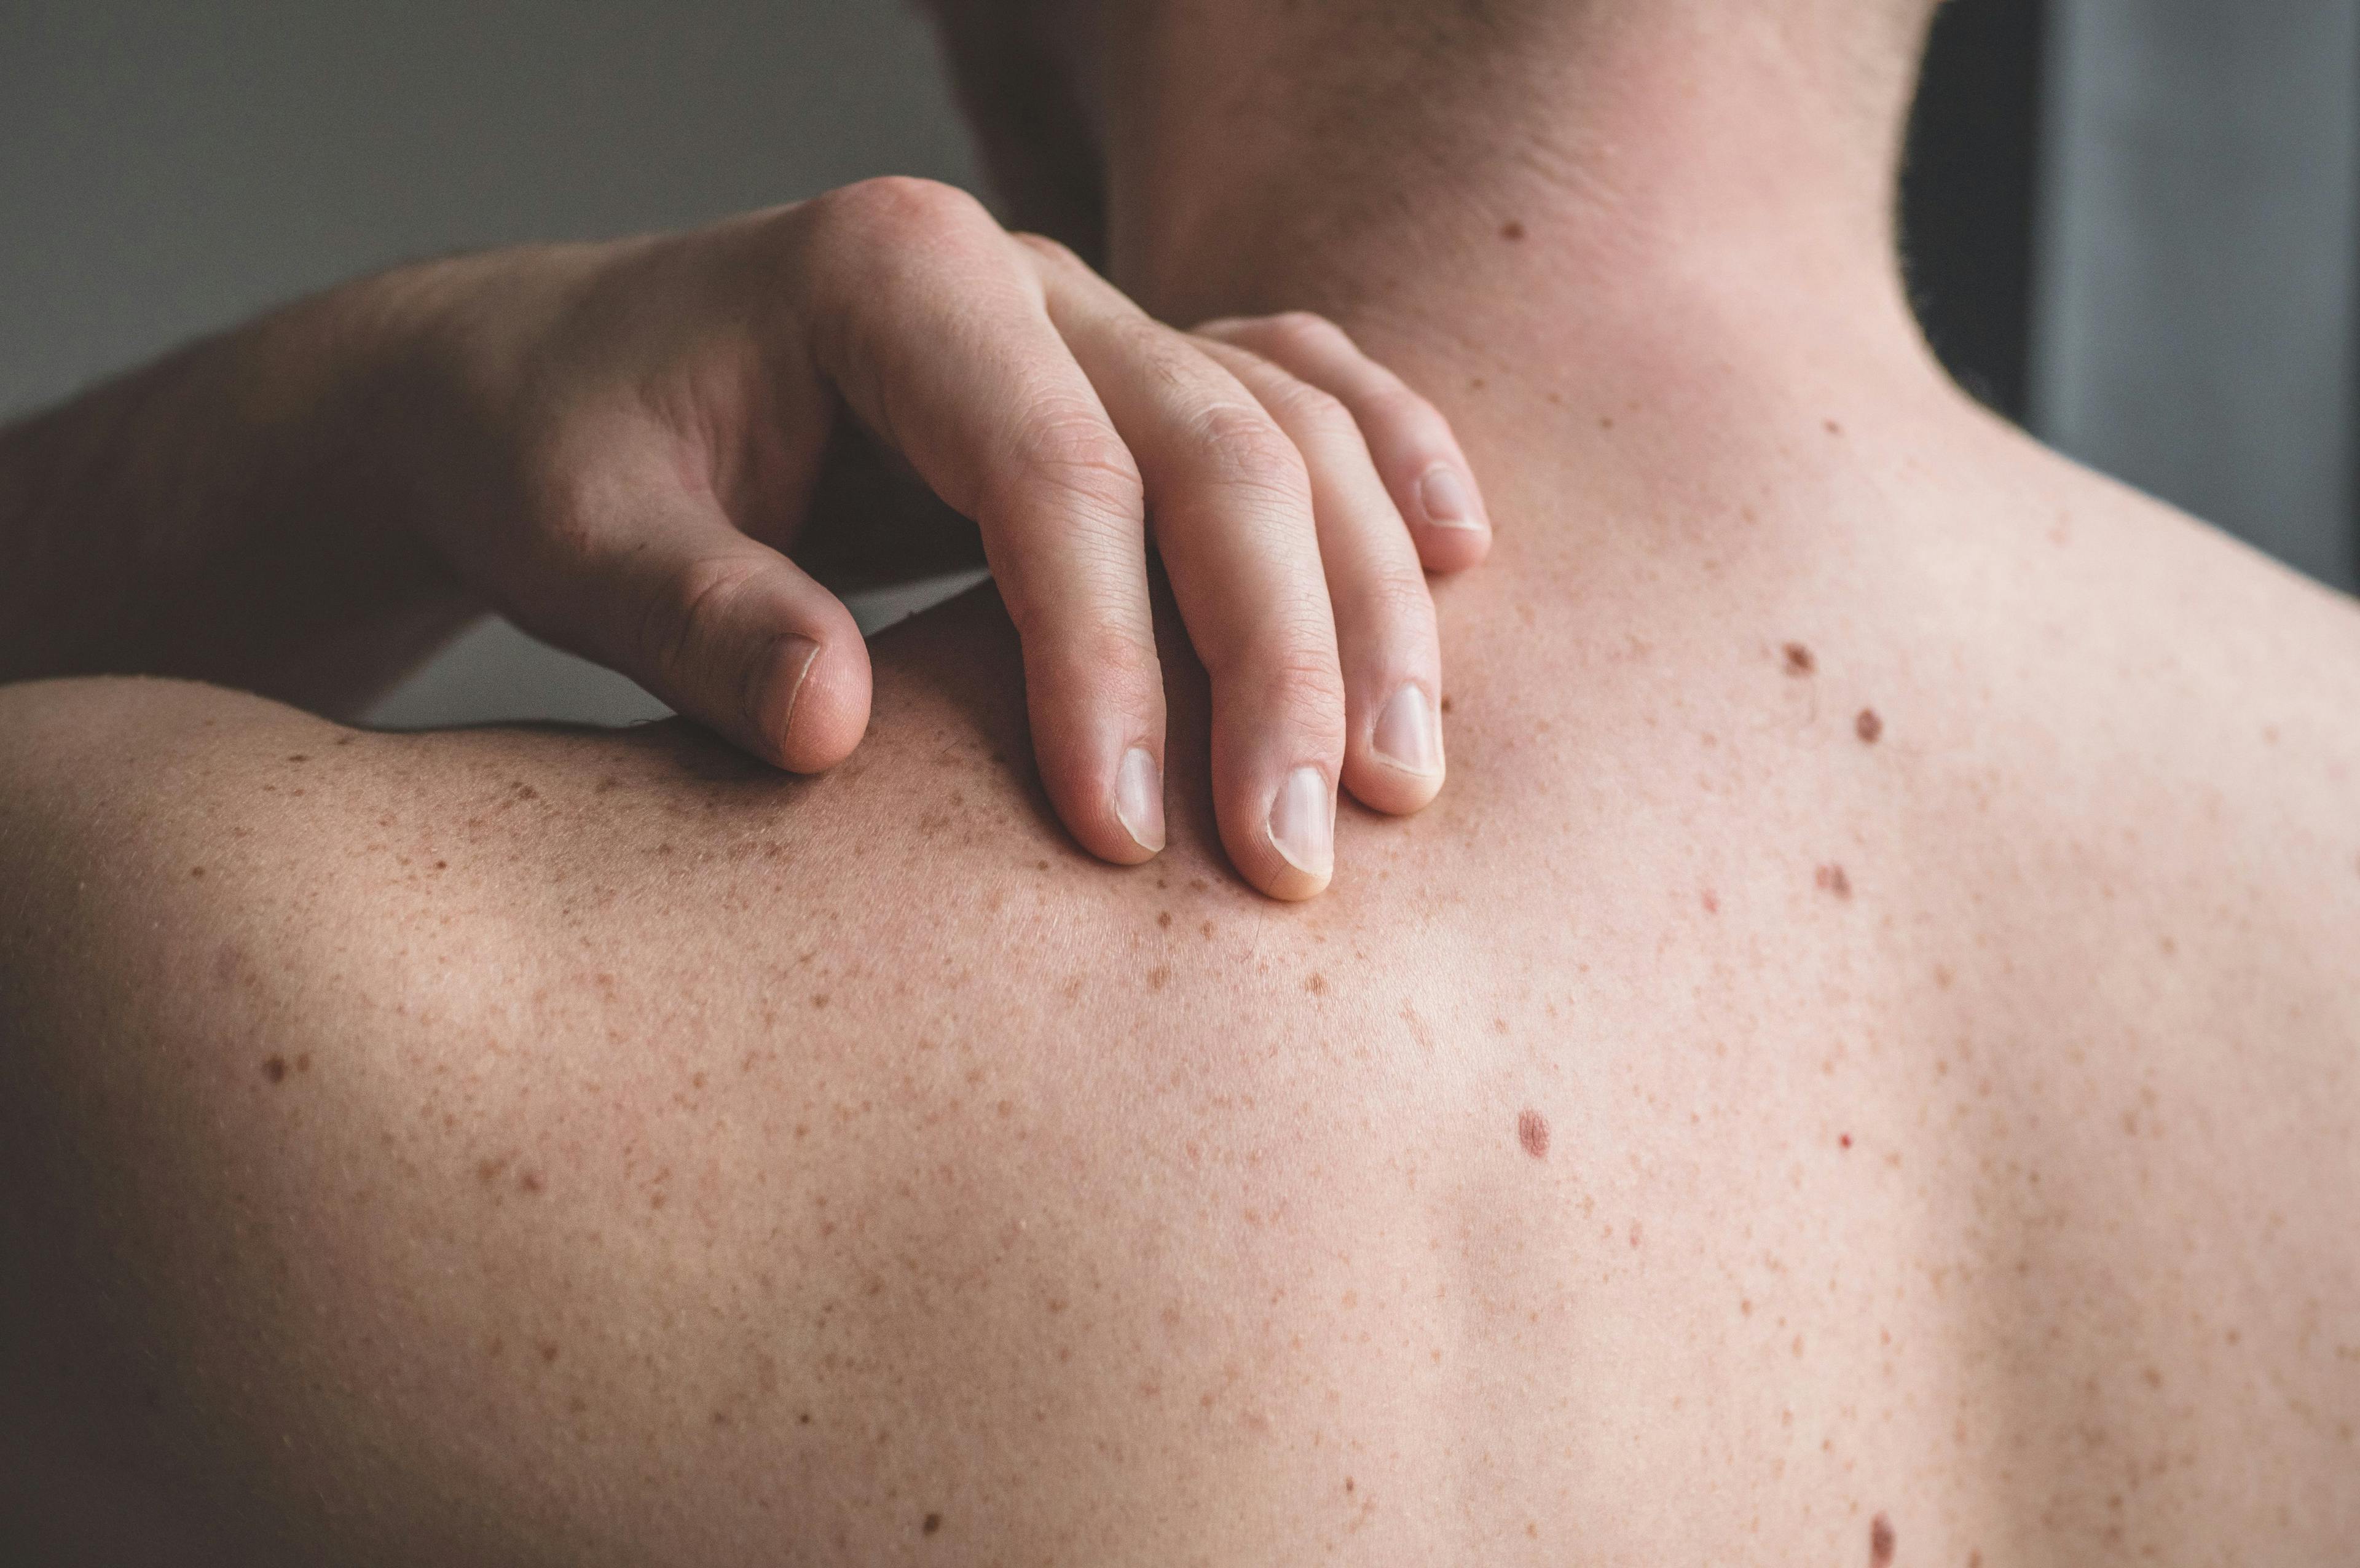 FDA Accepts Priority Review for Melanoma Treatment